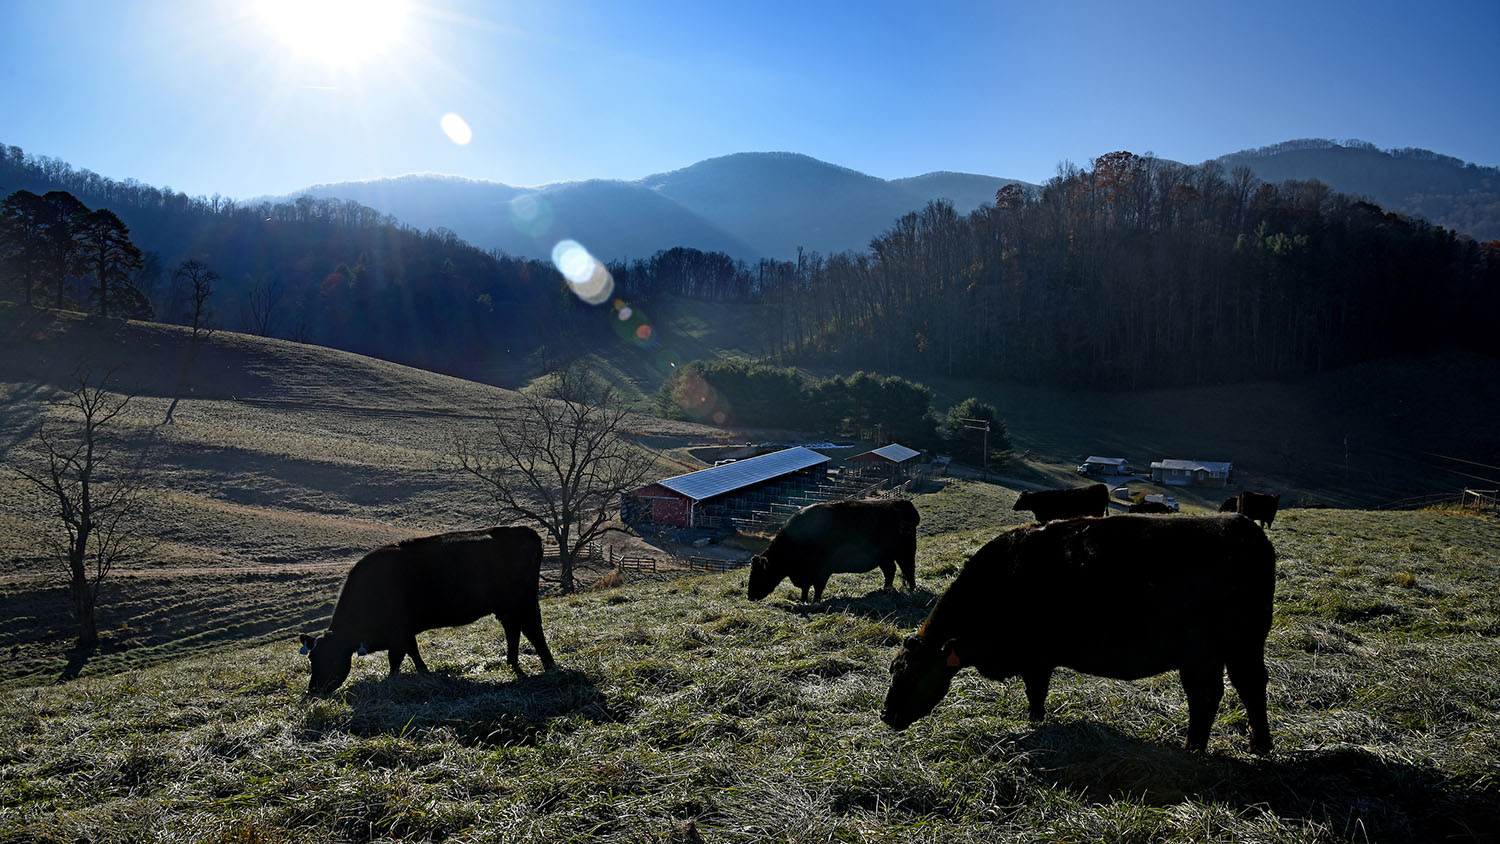 Cattle graze on a ridge high above the Mountain Research Station farms near Waynesville.